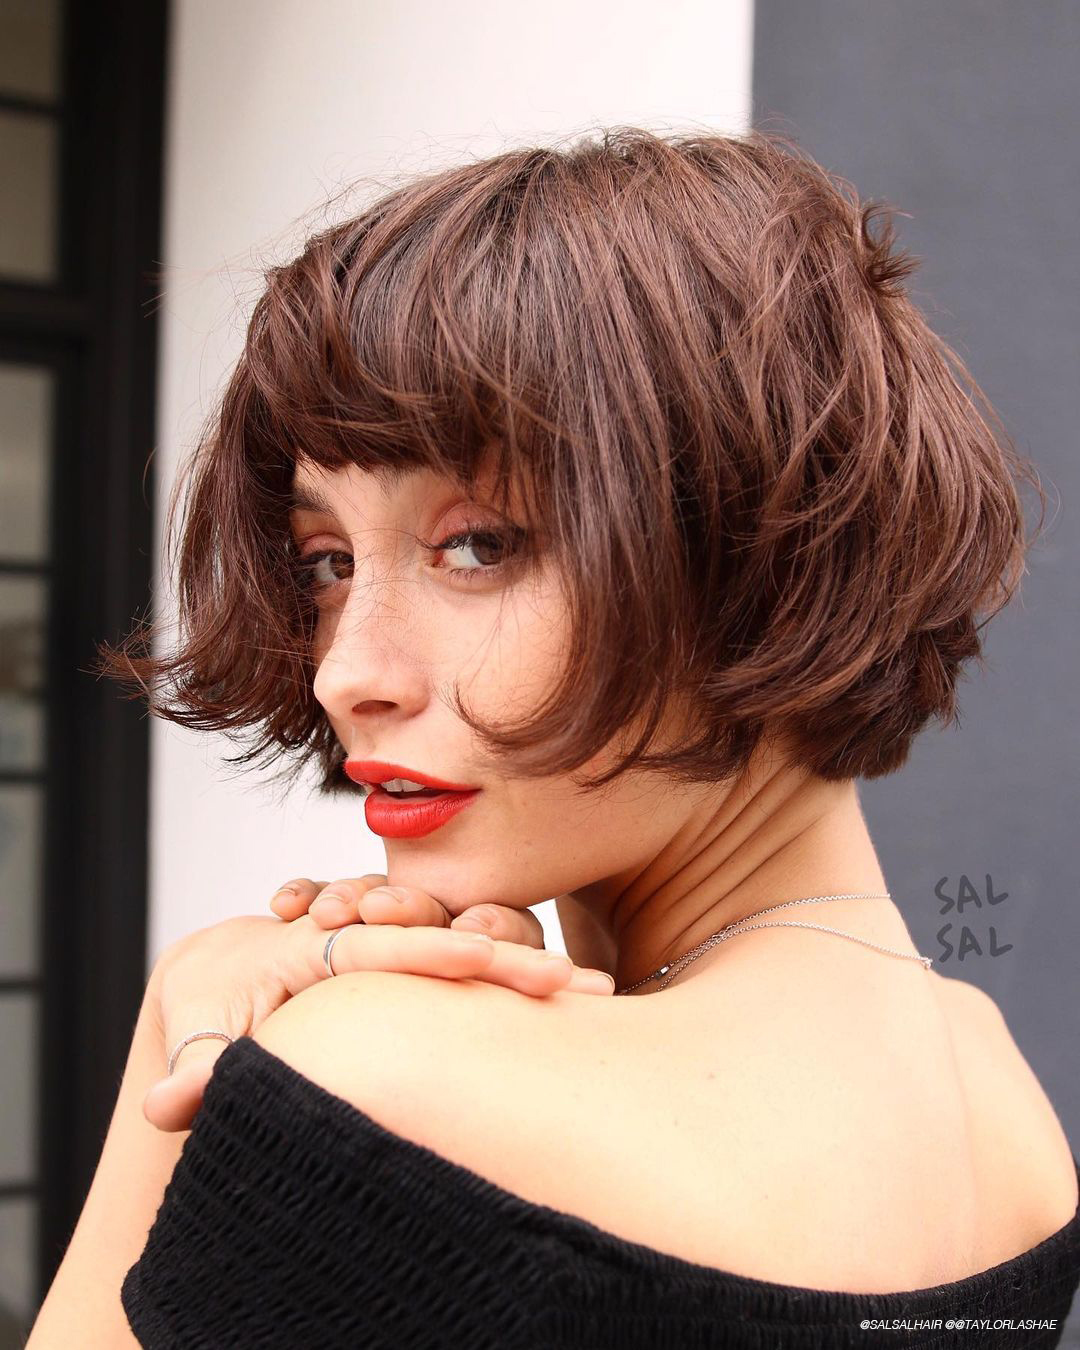 The Top 5 Haircut Trends For 2023 Bangstyle House of Hair Inspiration